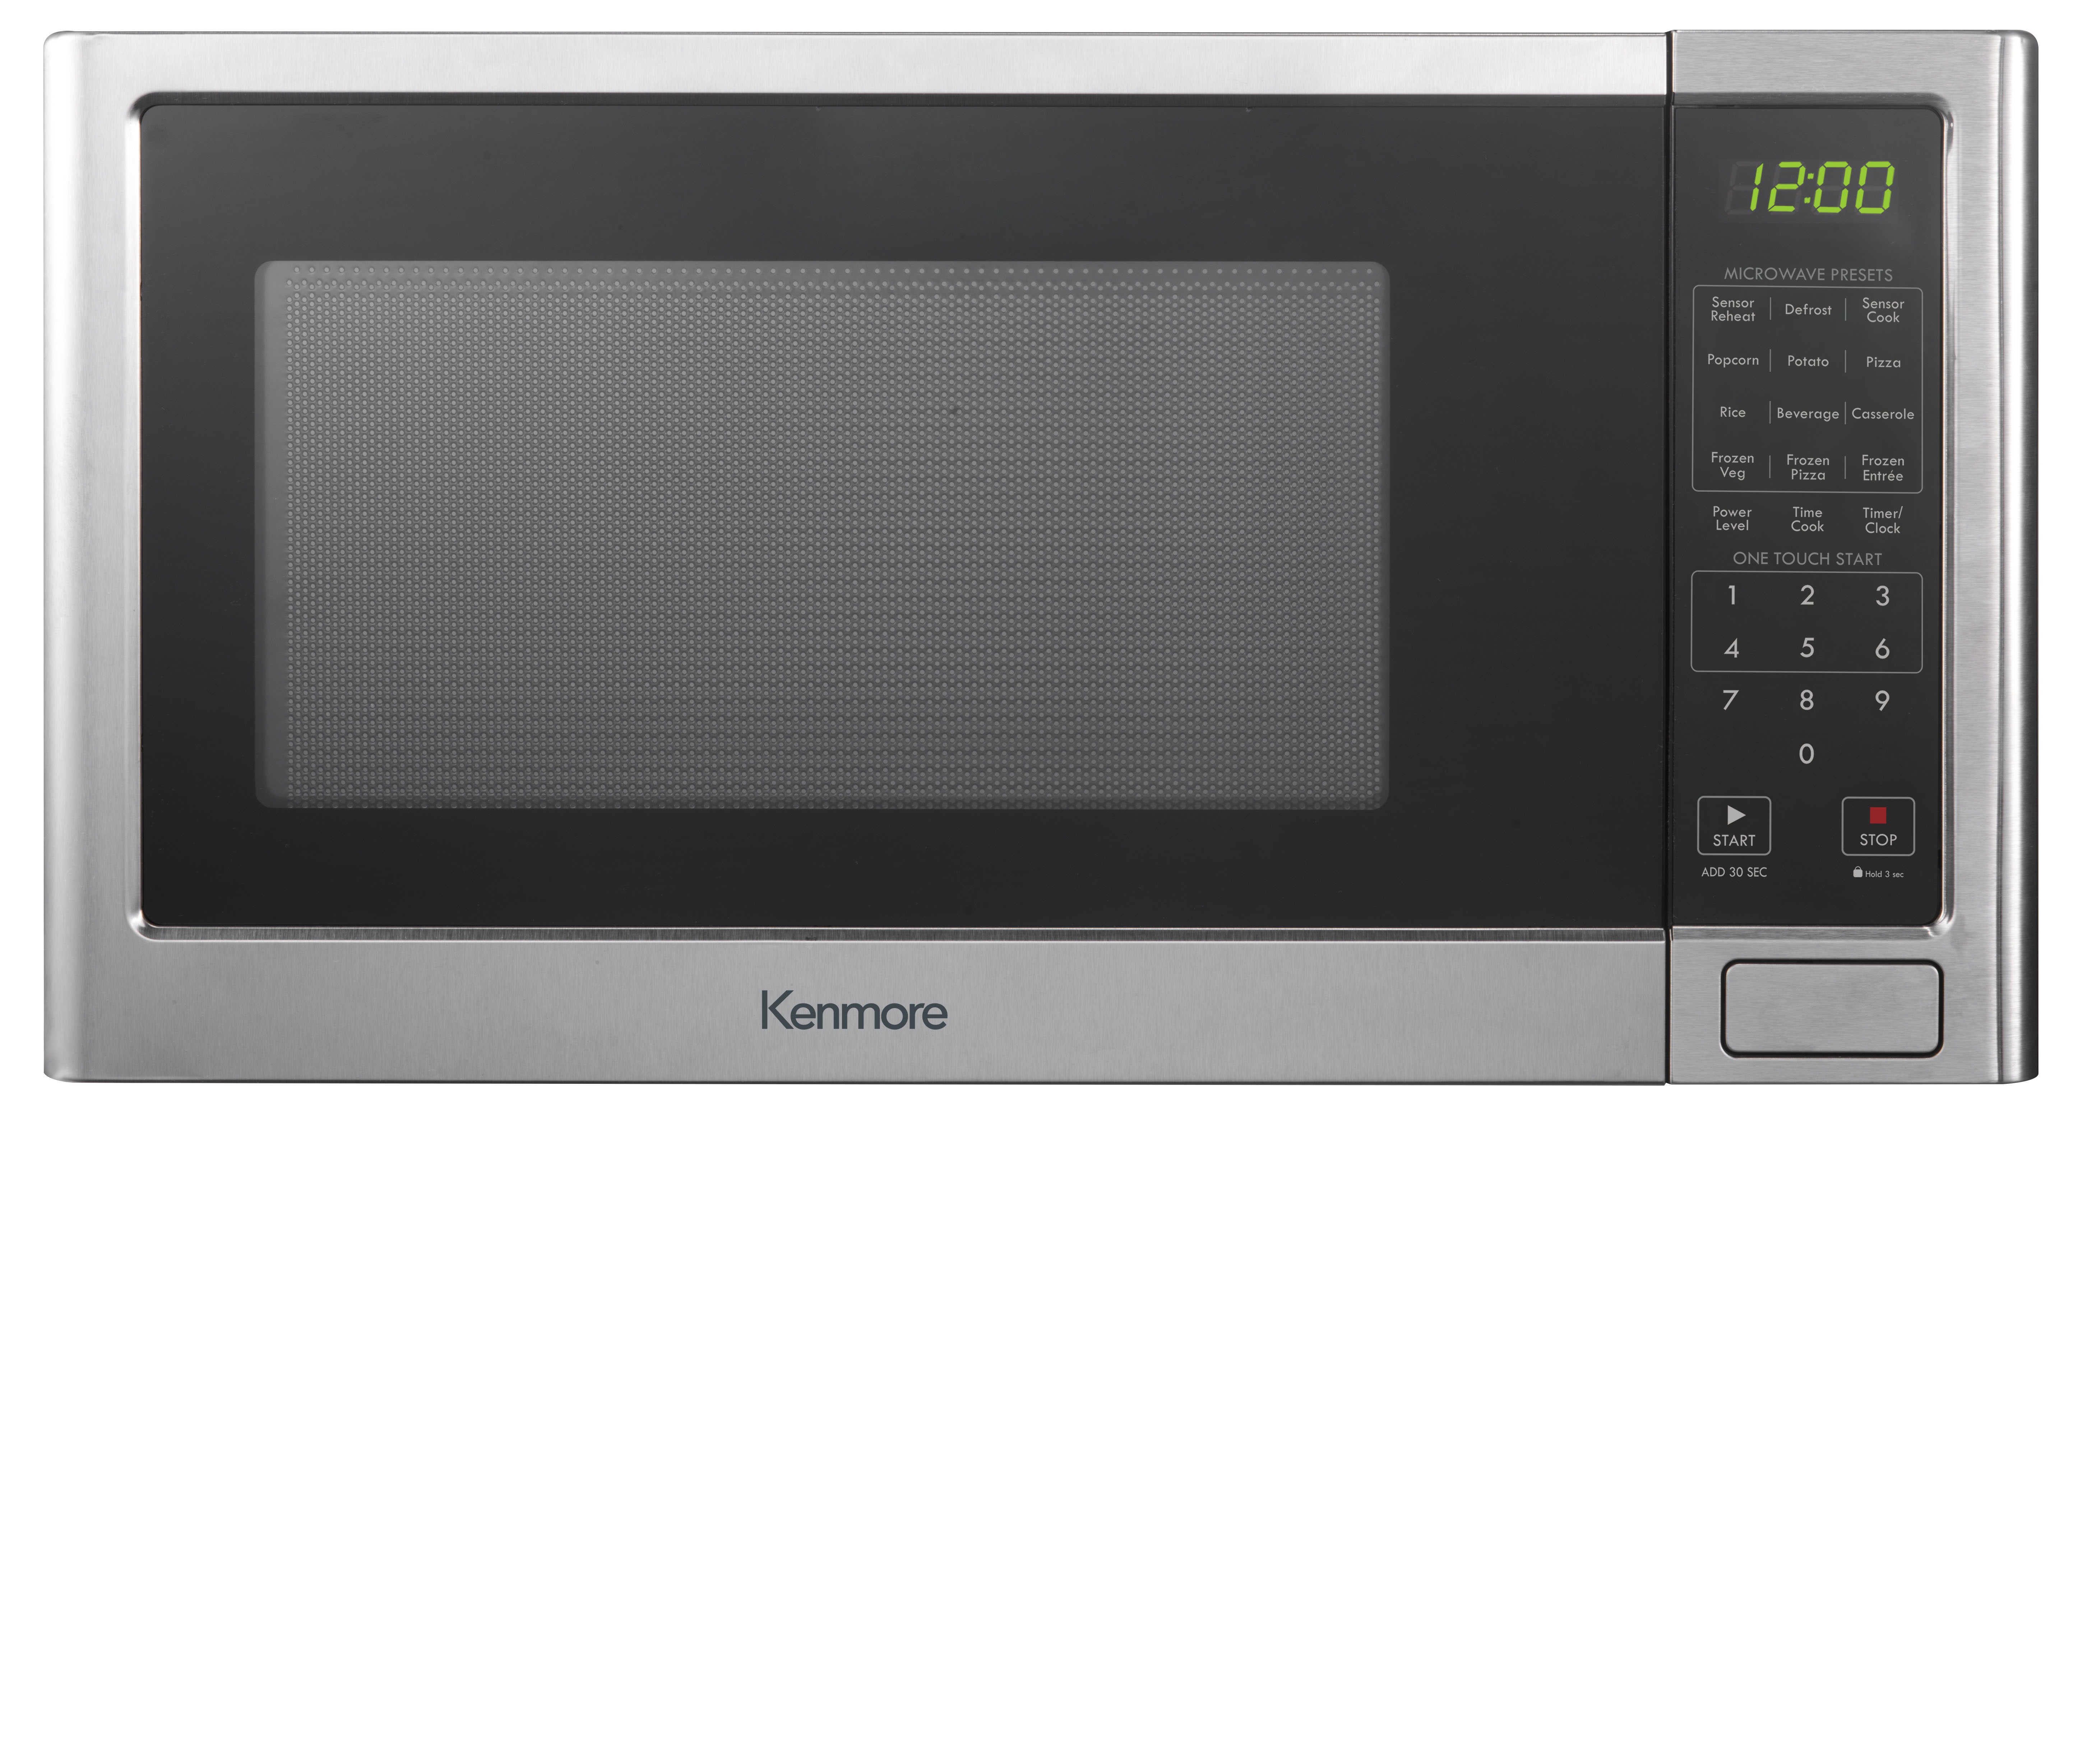 6914431210508 - 76983 1.6 CU. FT. MICROWAVE OVEN - STAINLESS STEEL